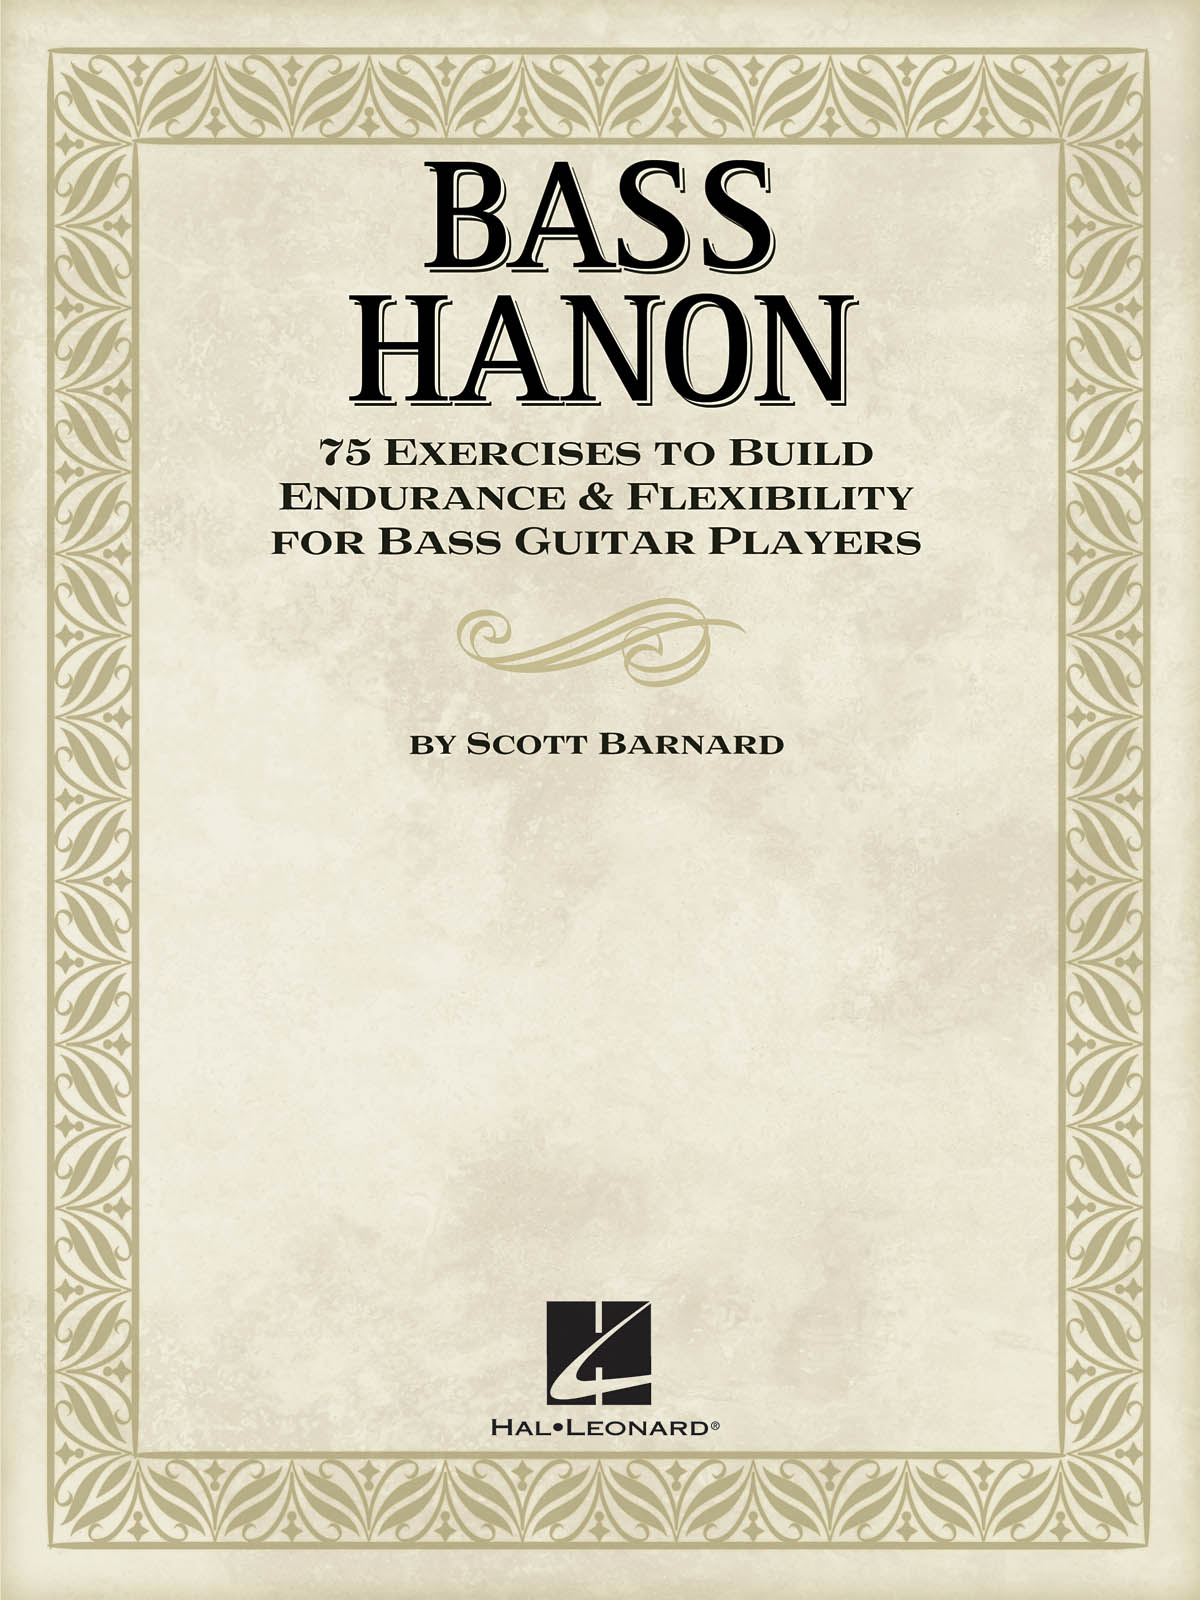 Bass Hanon - 75 Exercises to Build Endurance and Flexibility for Bass Guitar Players - noty pro basovou kytaru